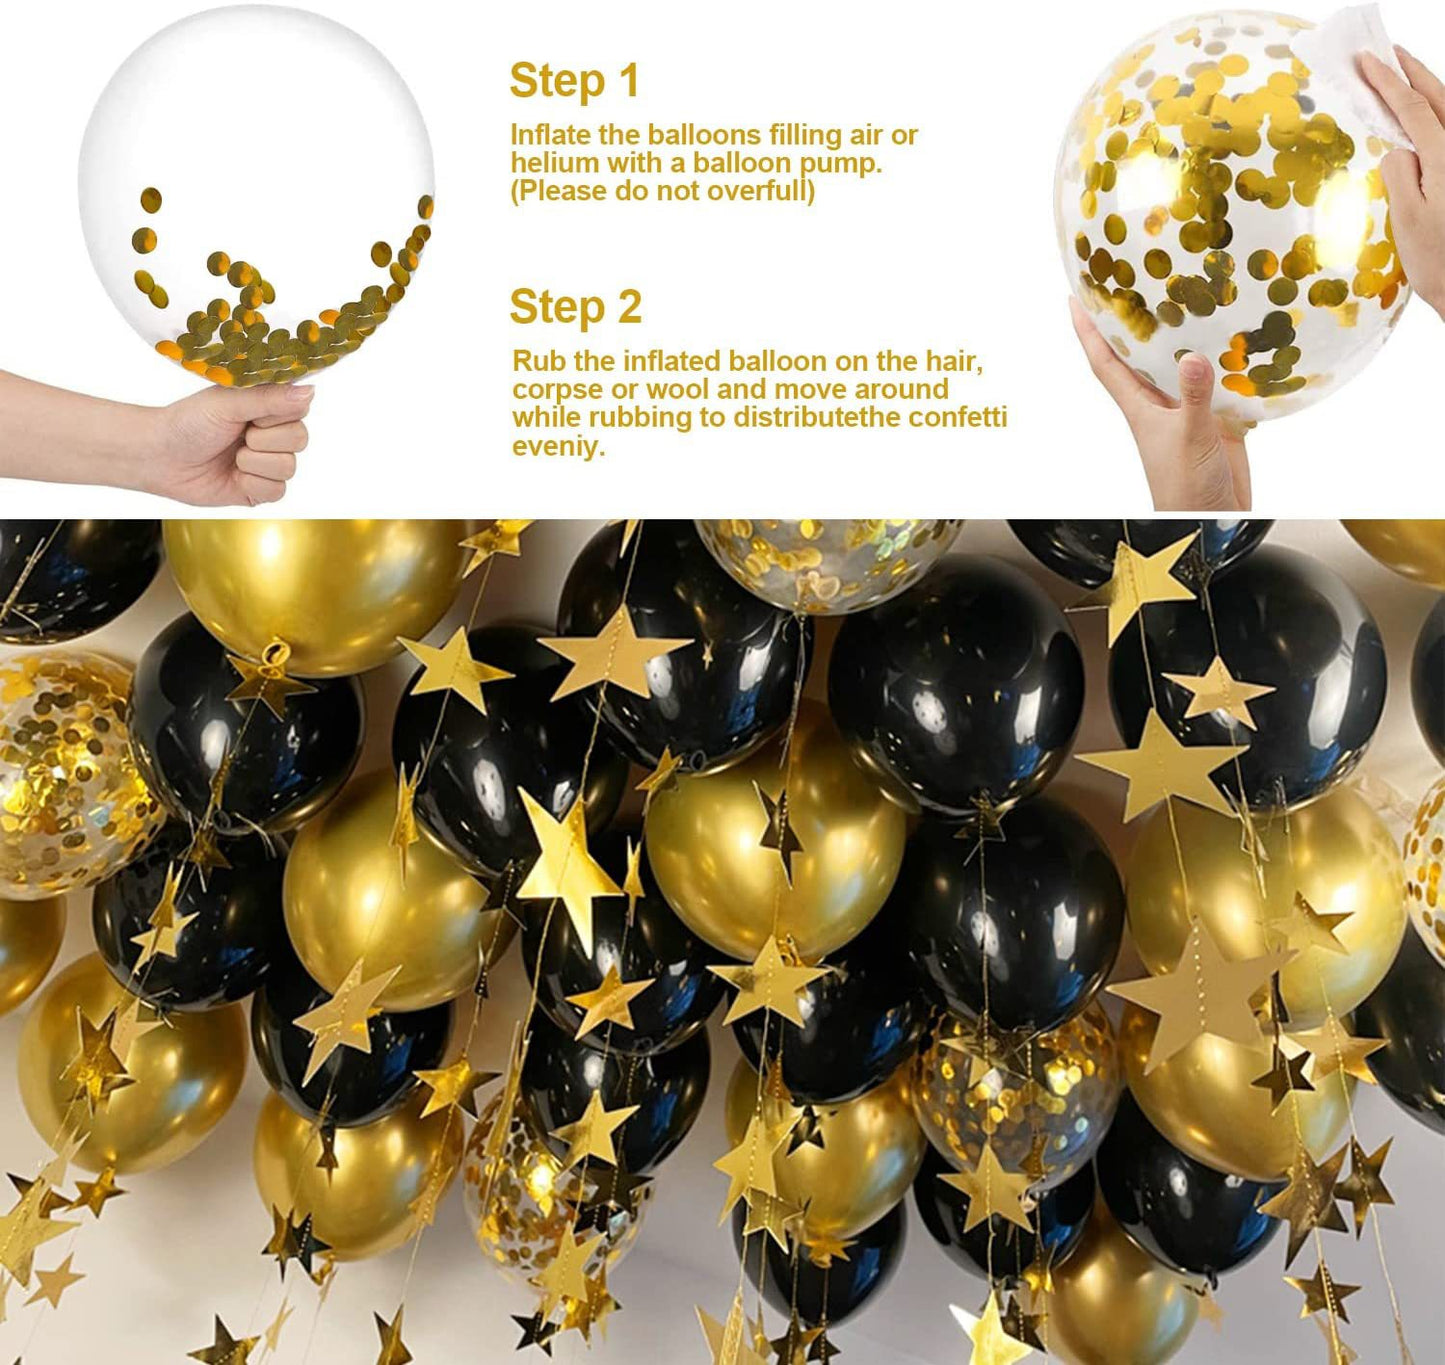 Black and Gold Balloon Arch Set Graduate Day Bachelor Party Balloon Decoration BA31